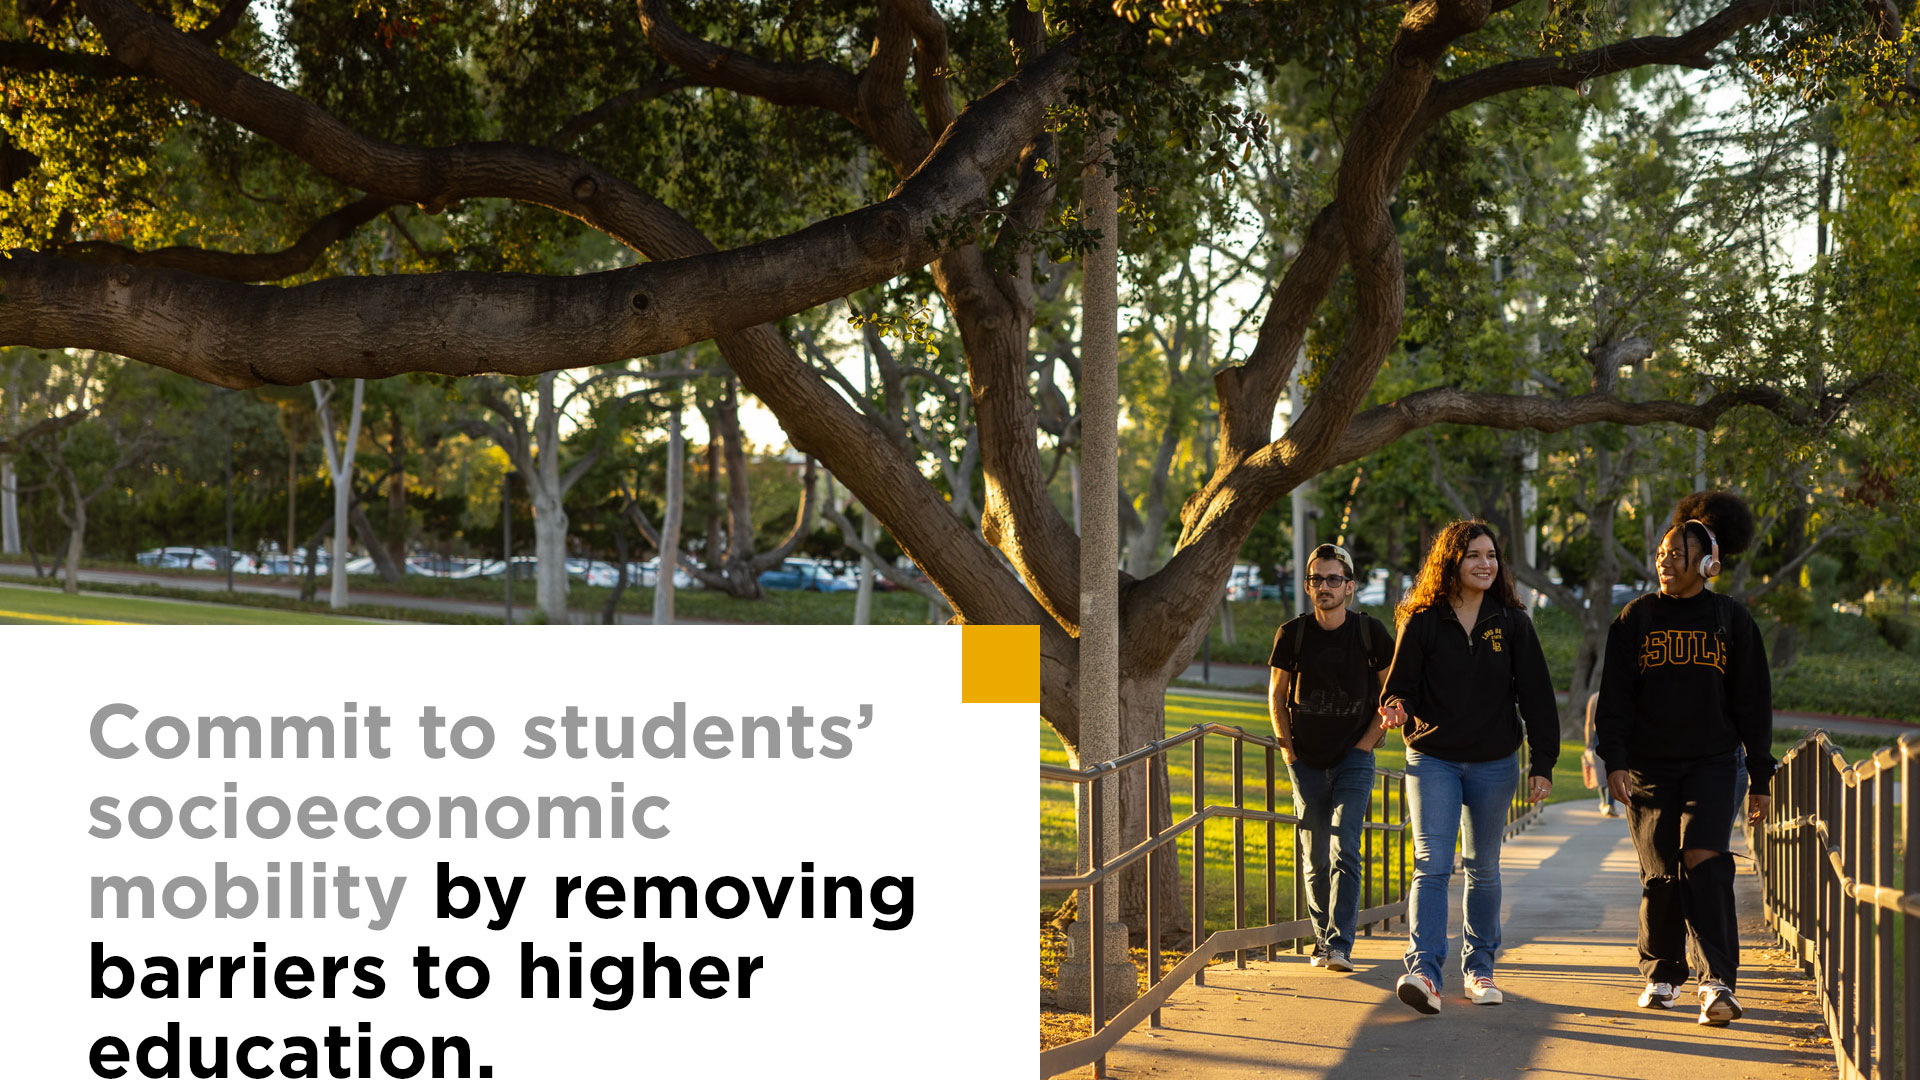 Commit to students’ socioeconomic mobility by removing barriers to higher education. Image shows students walking on campus. 